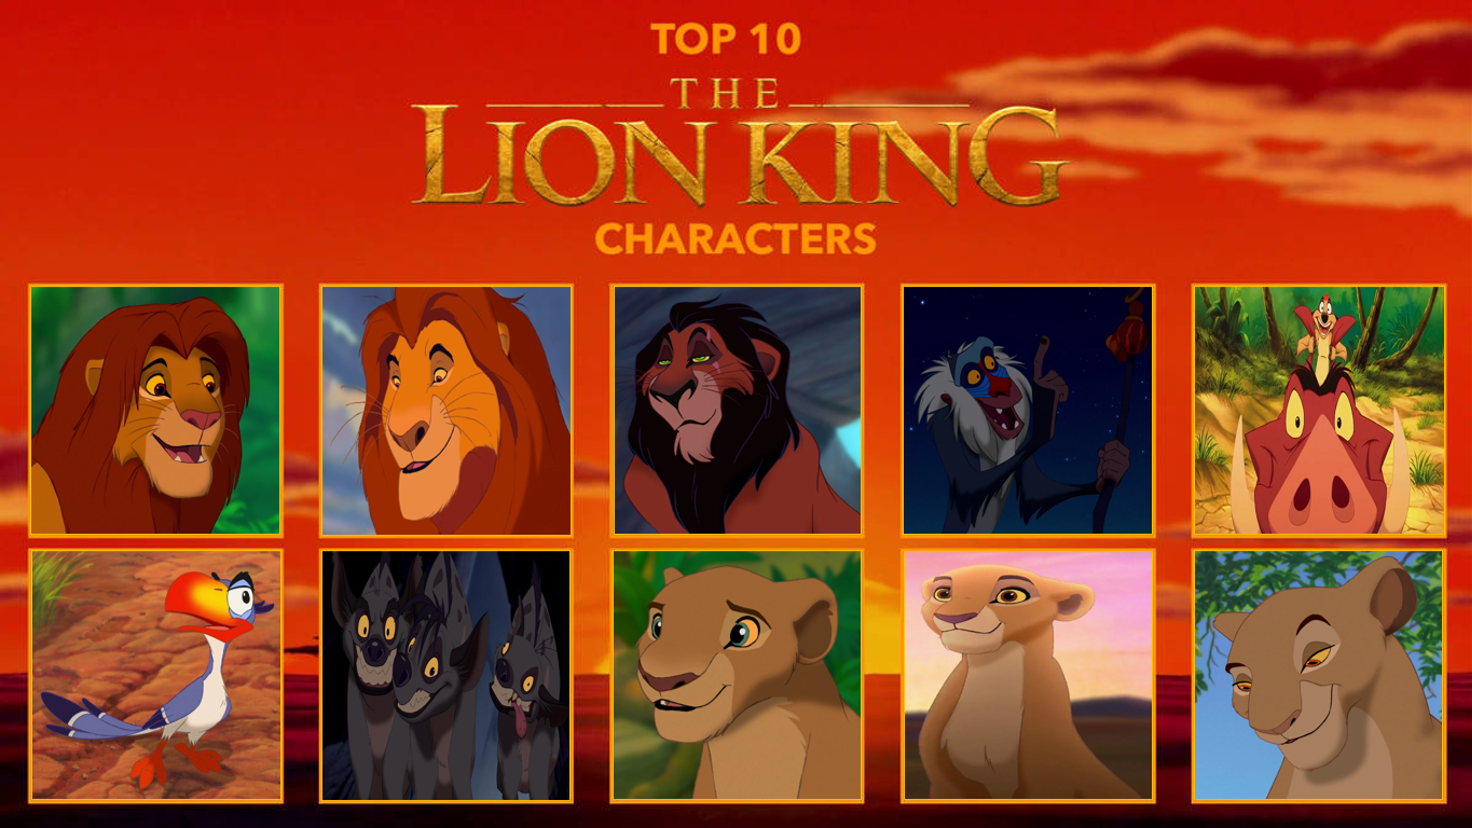 Top 10 The Lion King Characters By Media201055 On Deviantart